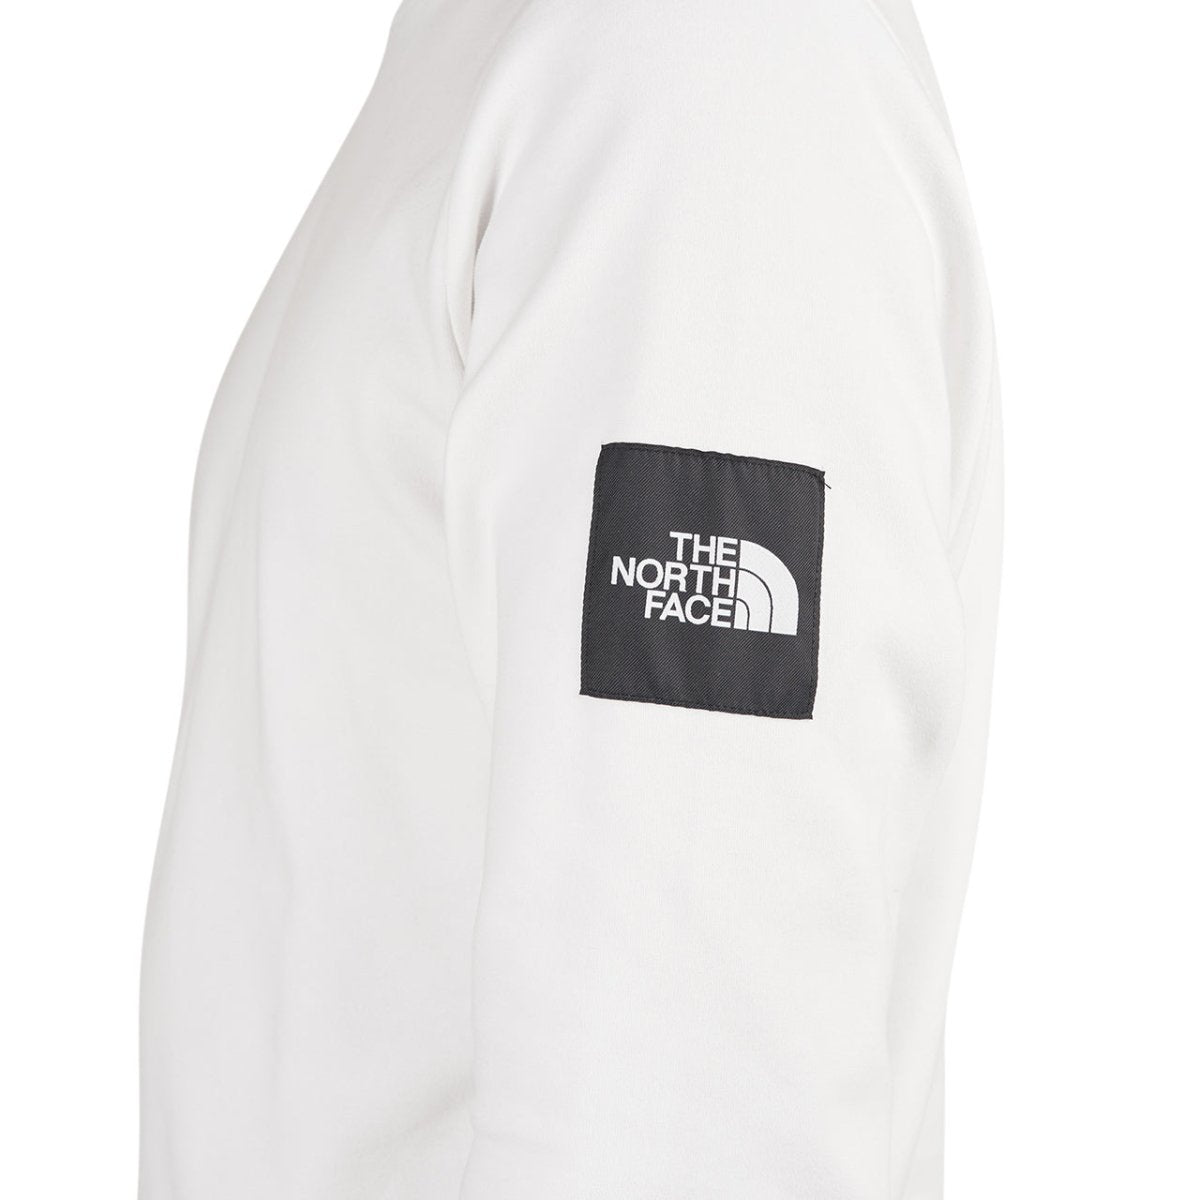 The North Face BB LST DNC Longsleeve (Weiß)  - Allike Store